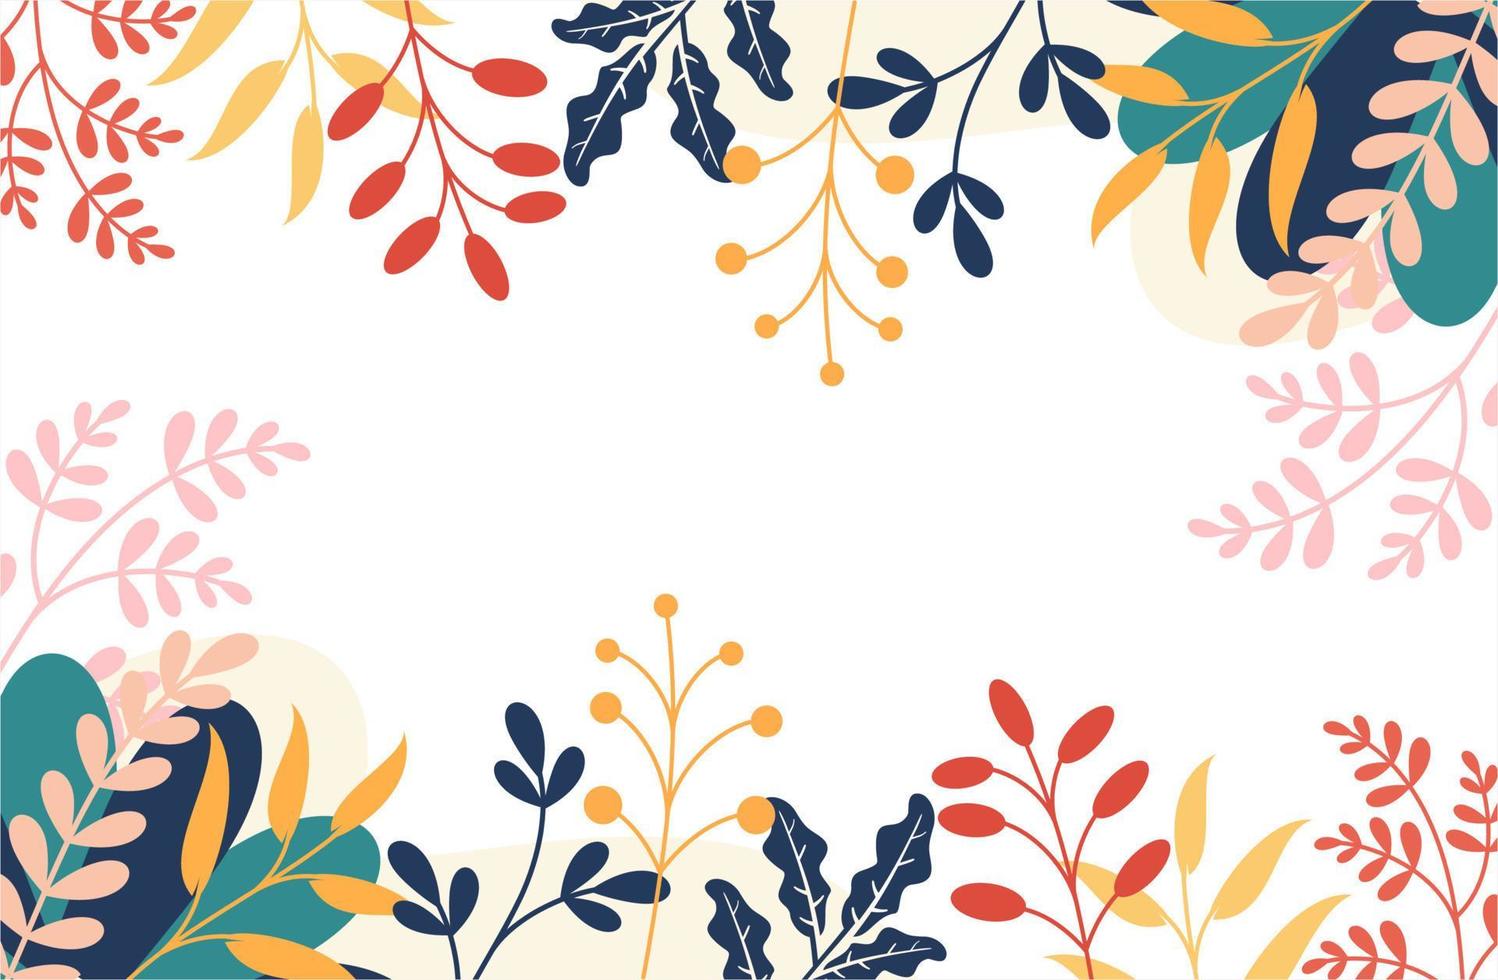 simple seamless pattern with floral and flower theme vector